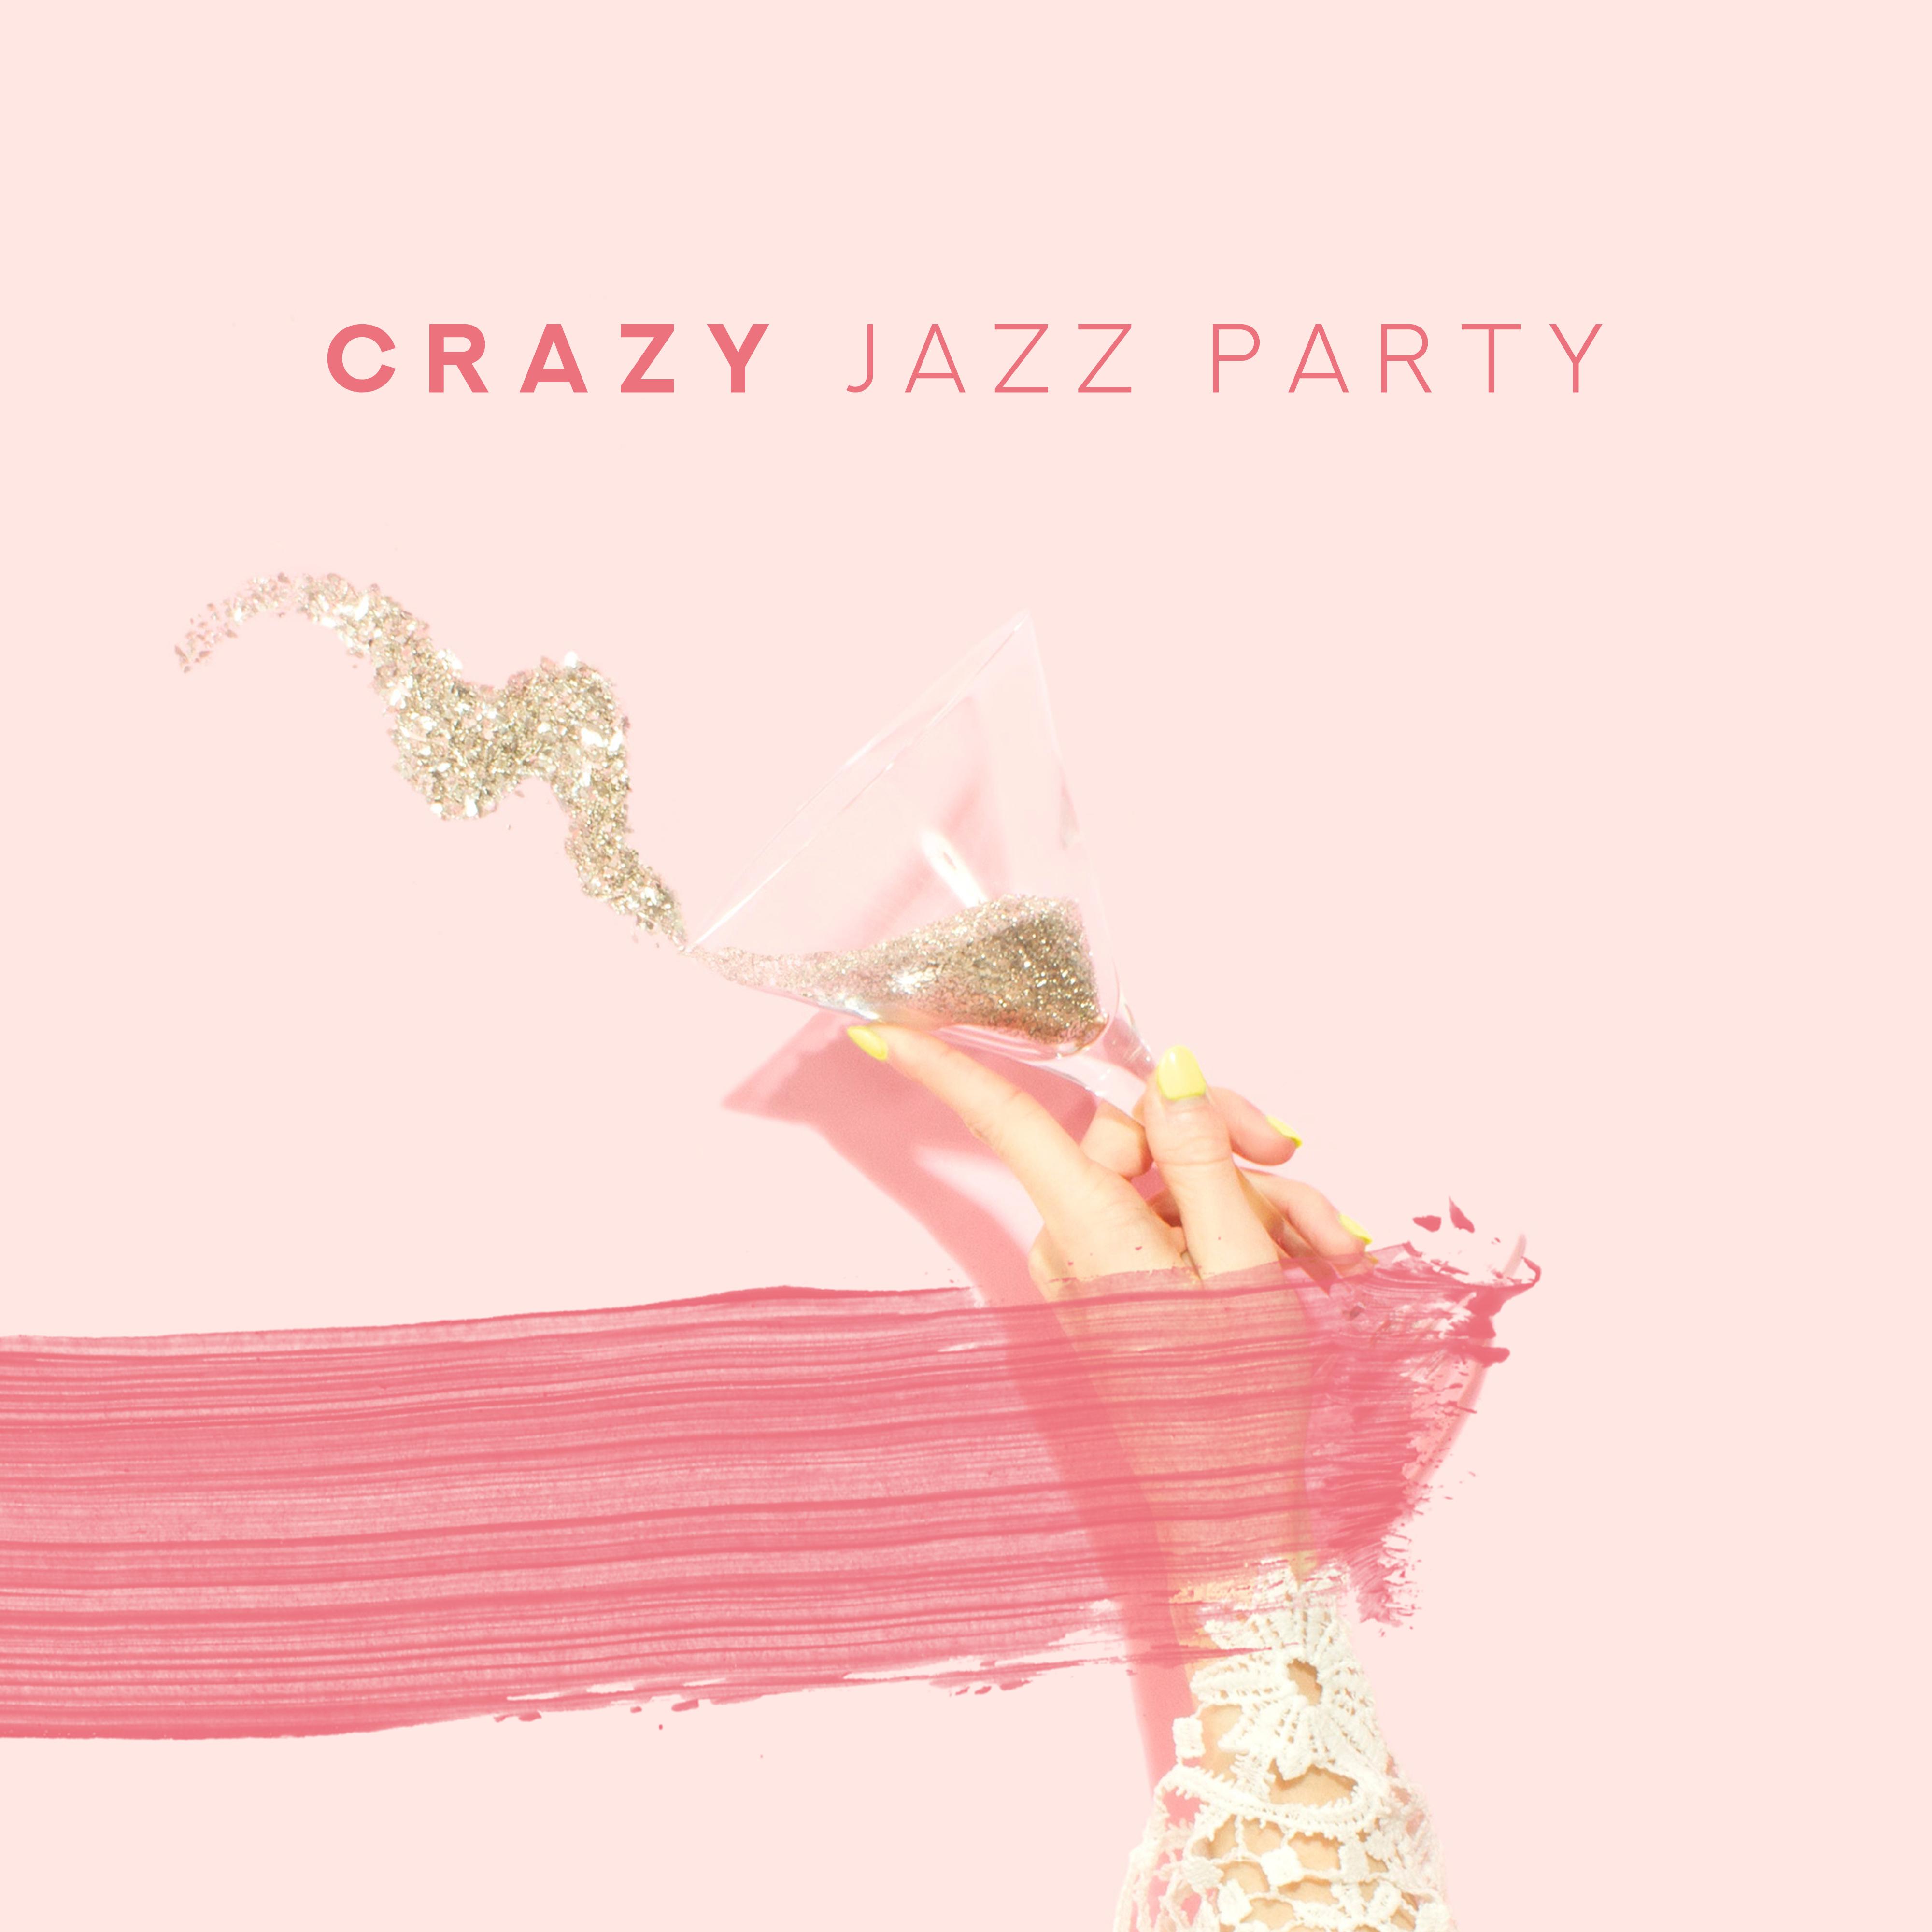 Crazy Jazz Party: Smooth Jazz Music Compilation 2019, Vintage Songs for Dance & Friends Meeting, Magical Sounds of Piano, Guitar, Trumpet & Many More